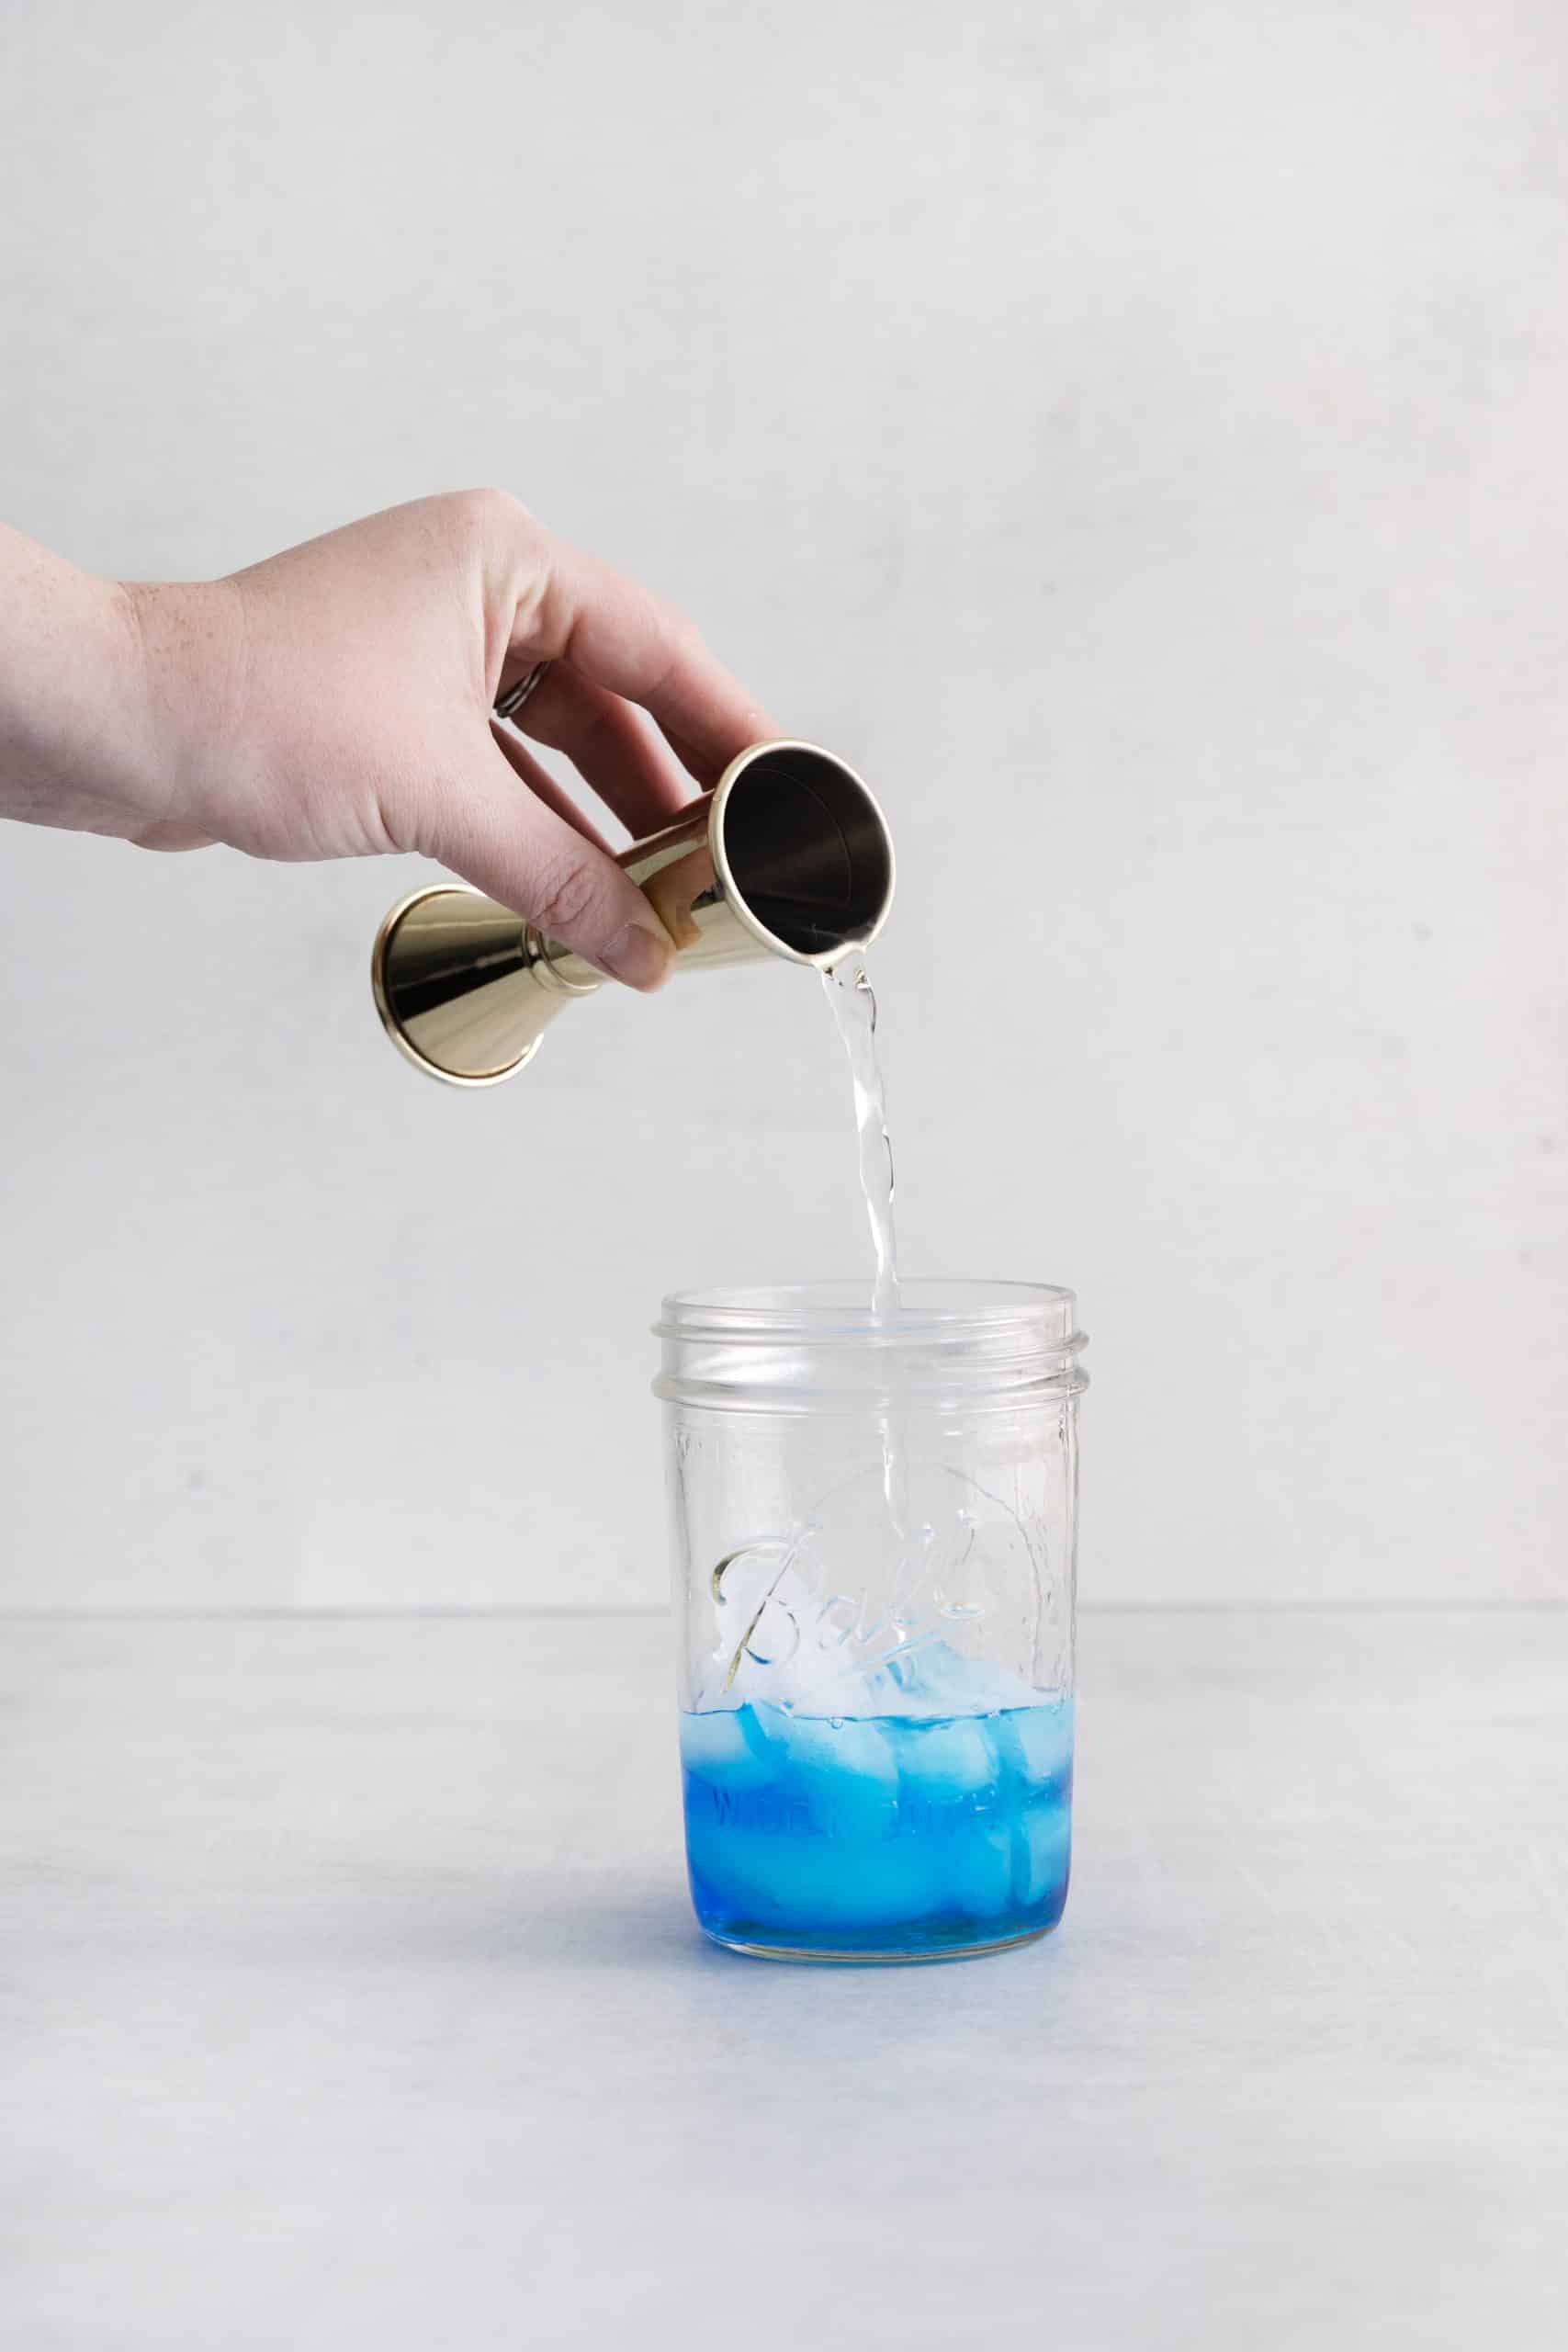 clear liquid being poured into a ball jar with blue liquid